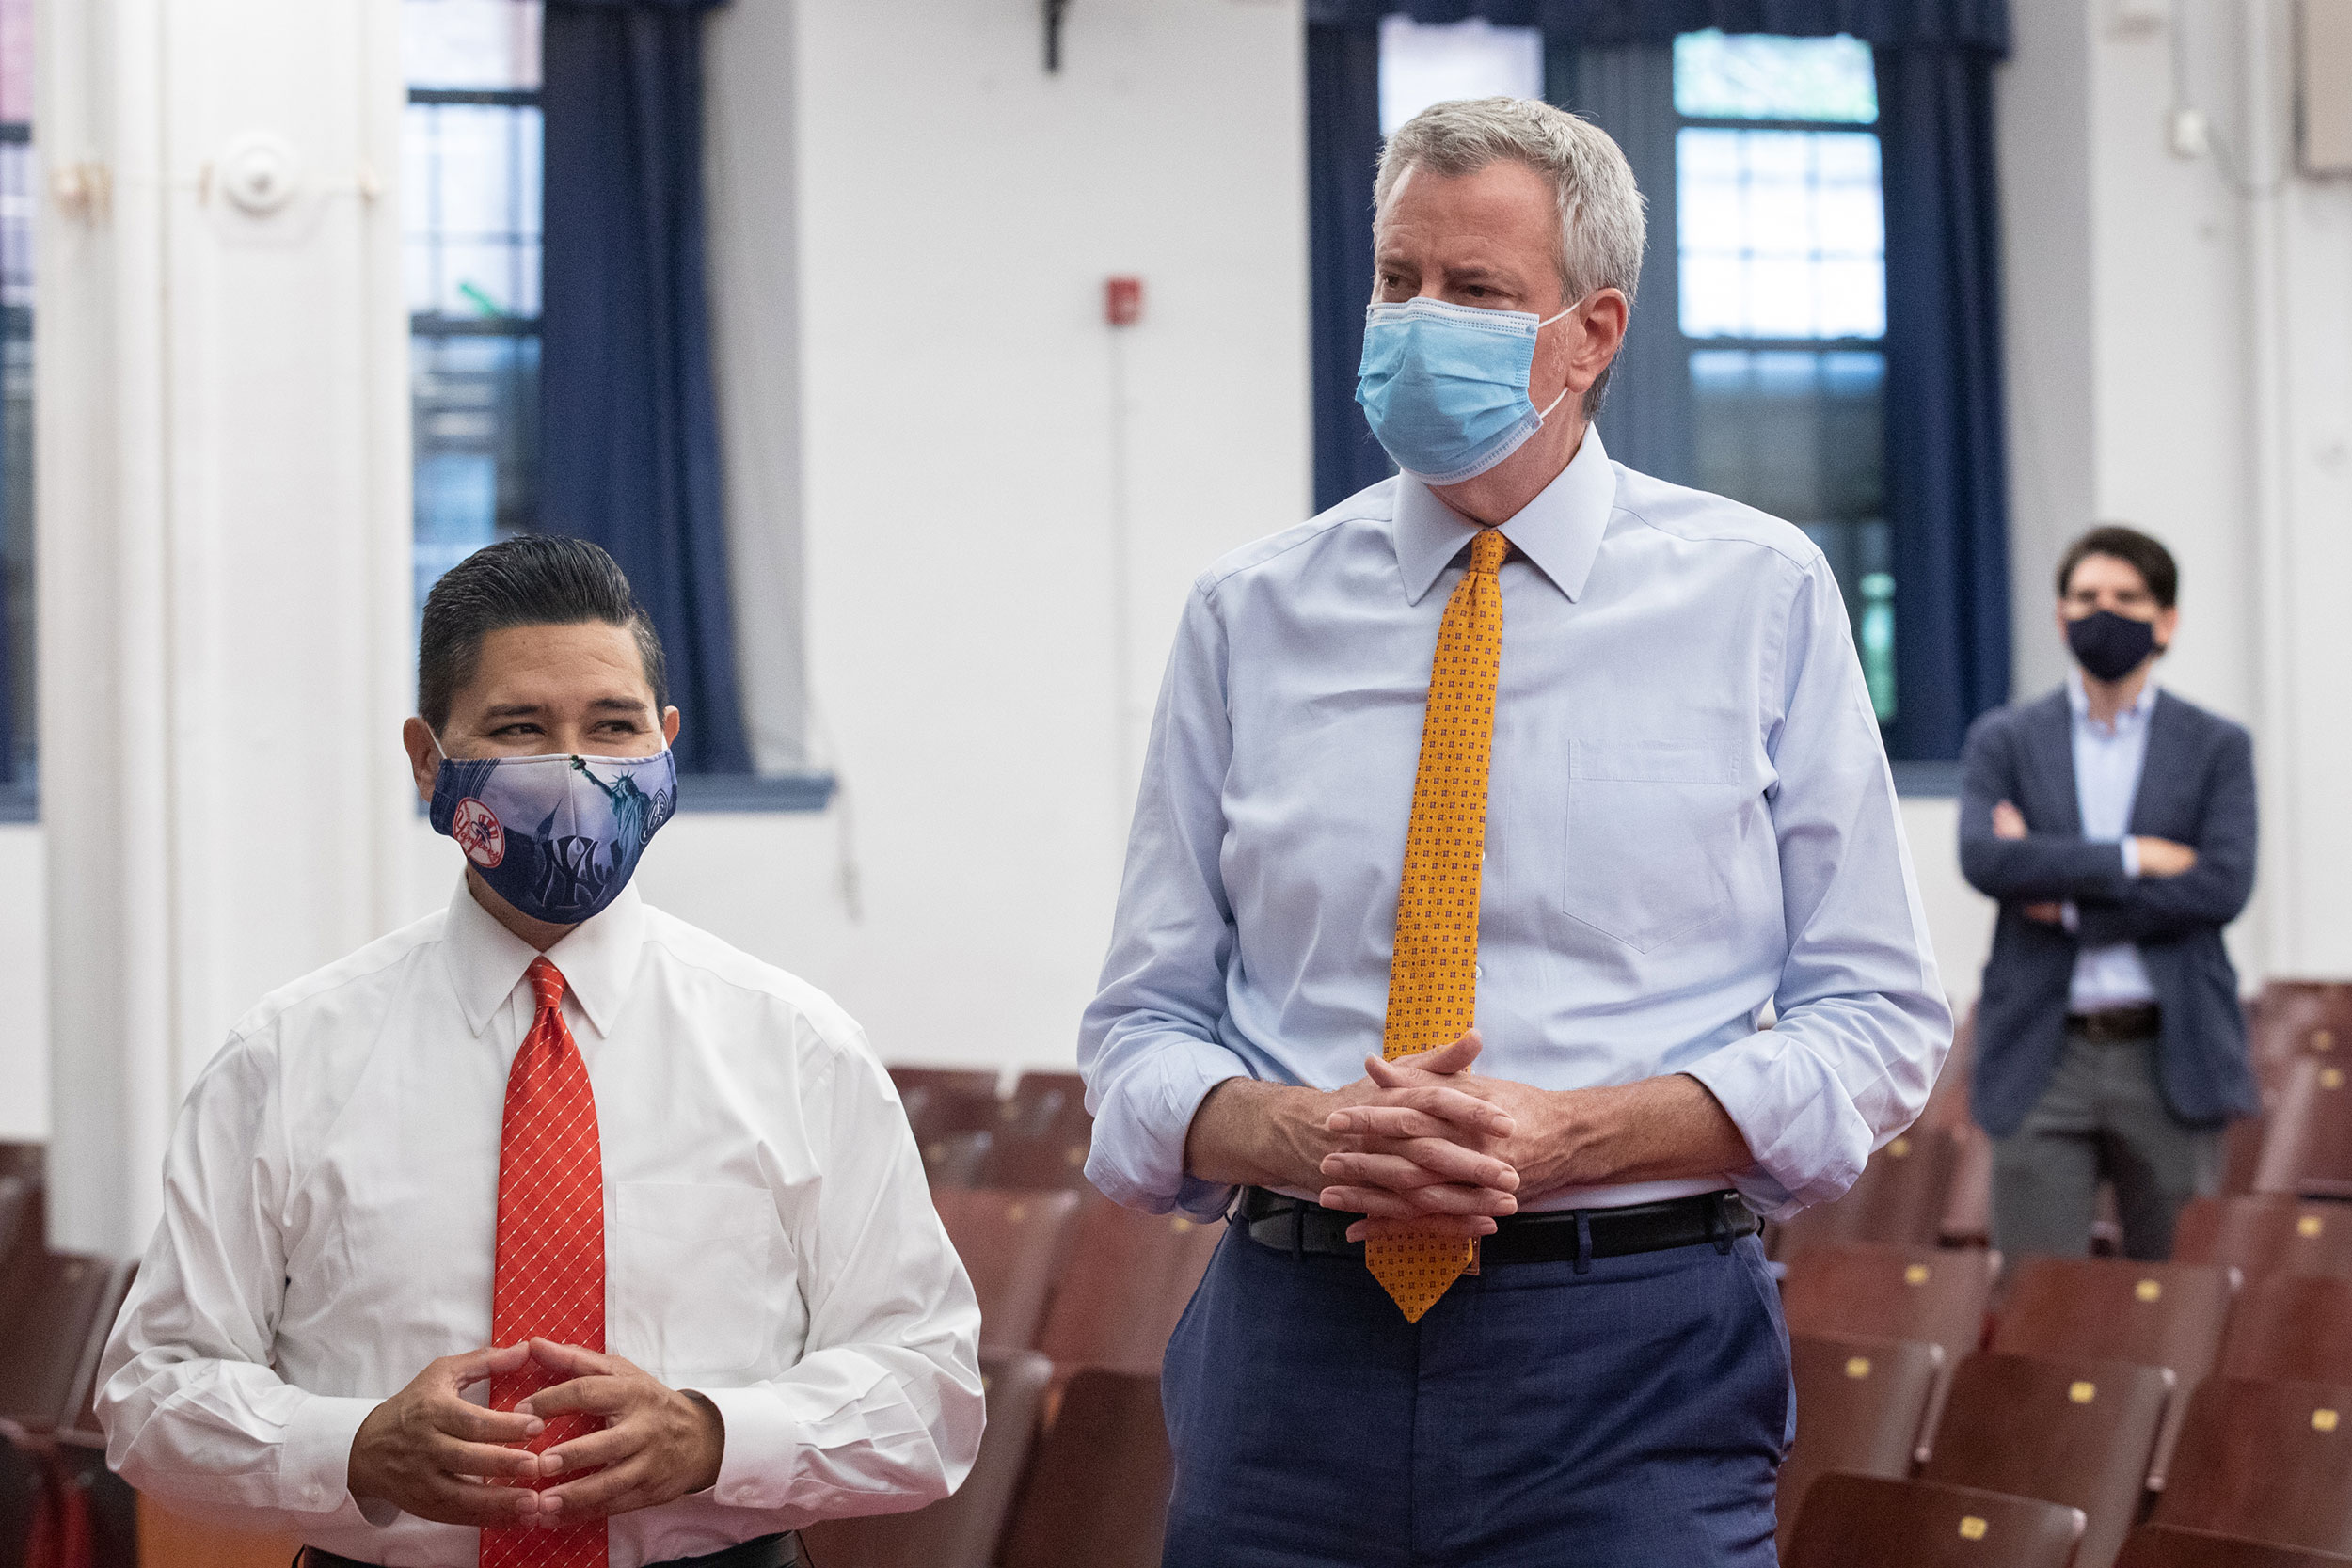 From left, New York City Schools Chancellor Richard Carrnza and Mayor Bill de Blasio attend a news conference at New Bridges Elementary School in Brooklyn on August 19.